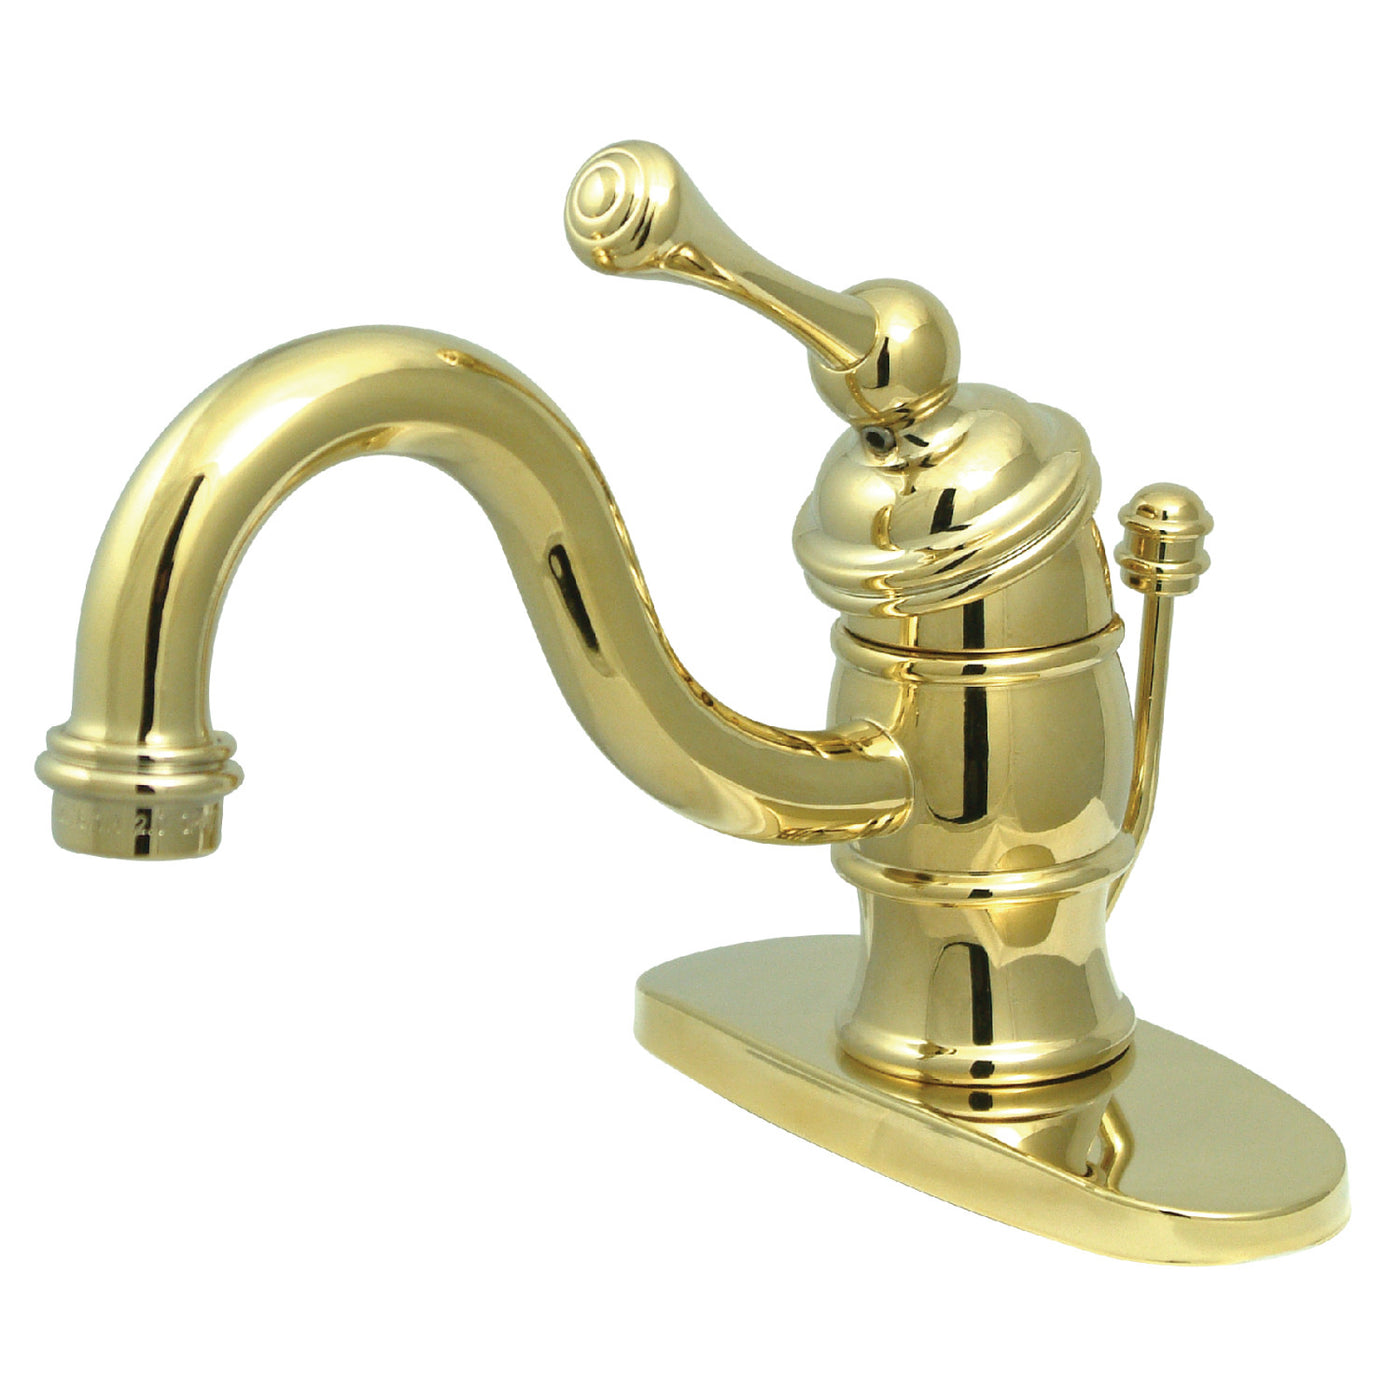 Elements of Design EB3402BL Single-Handle Bathroom Faucet with Pop-Up Drain, Polished Brass